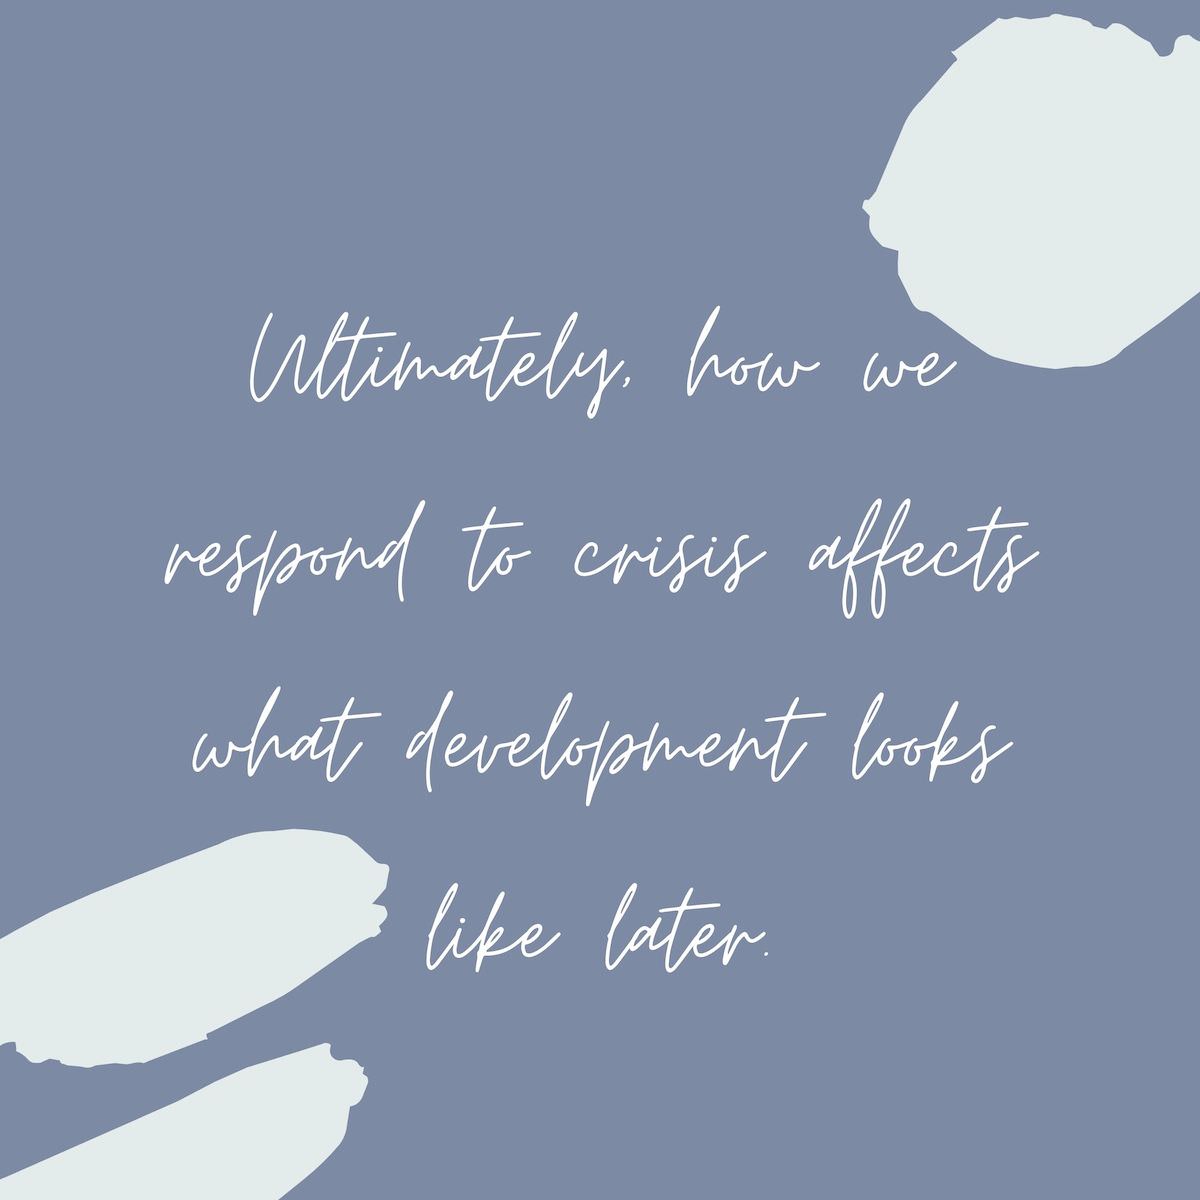 how we respond to crisis affects what development looks like later